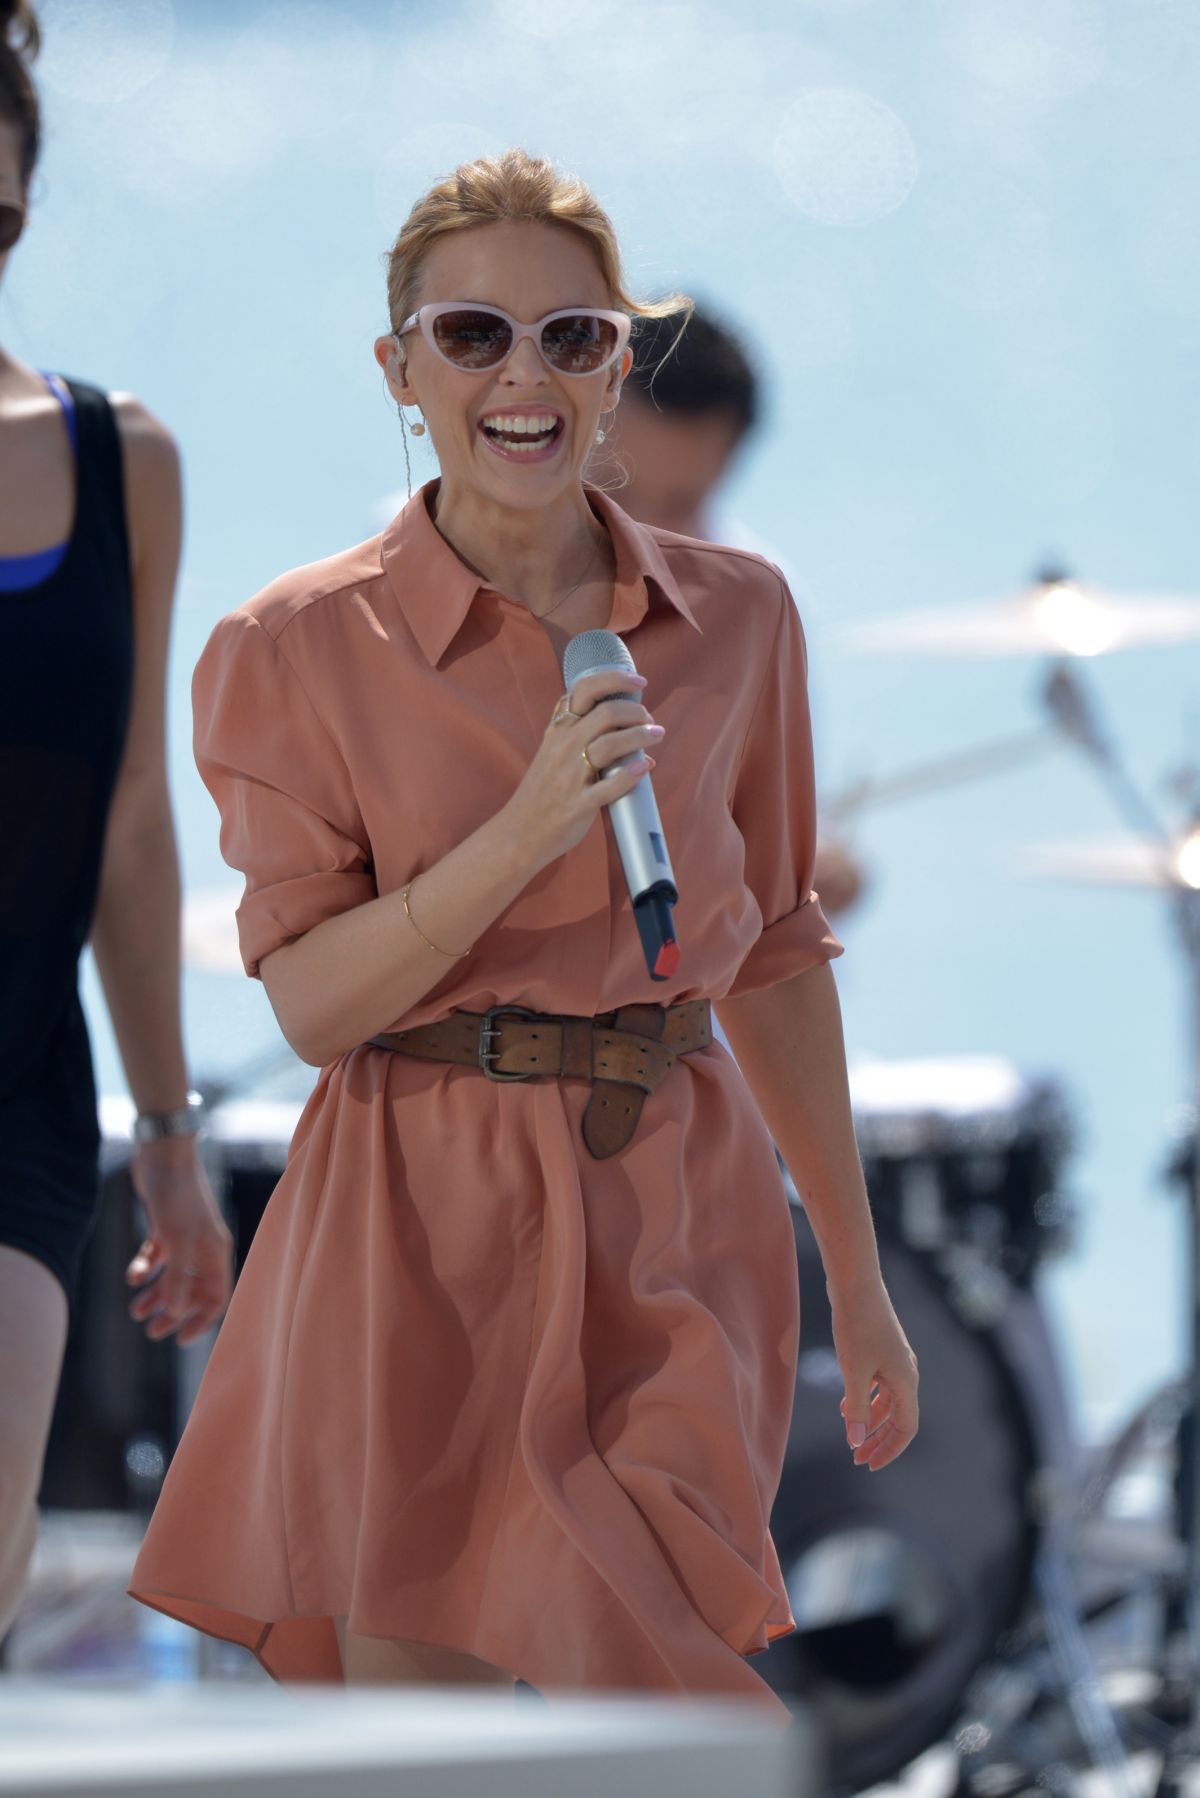 https://www.hawtcelebs.com/wp-content/uploads/2014/05/kylie-minogue-performs-at-stage-of-canal-in-cannes_21.jpg